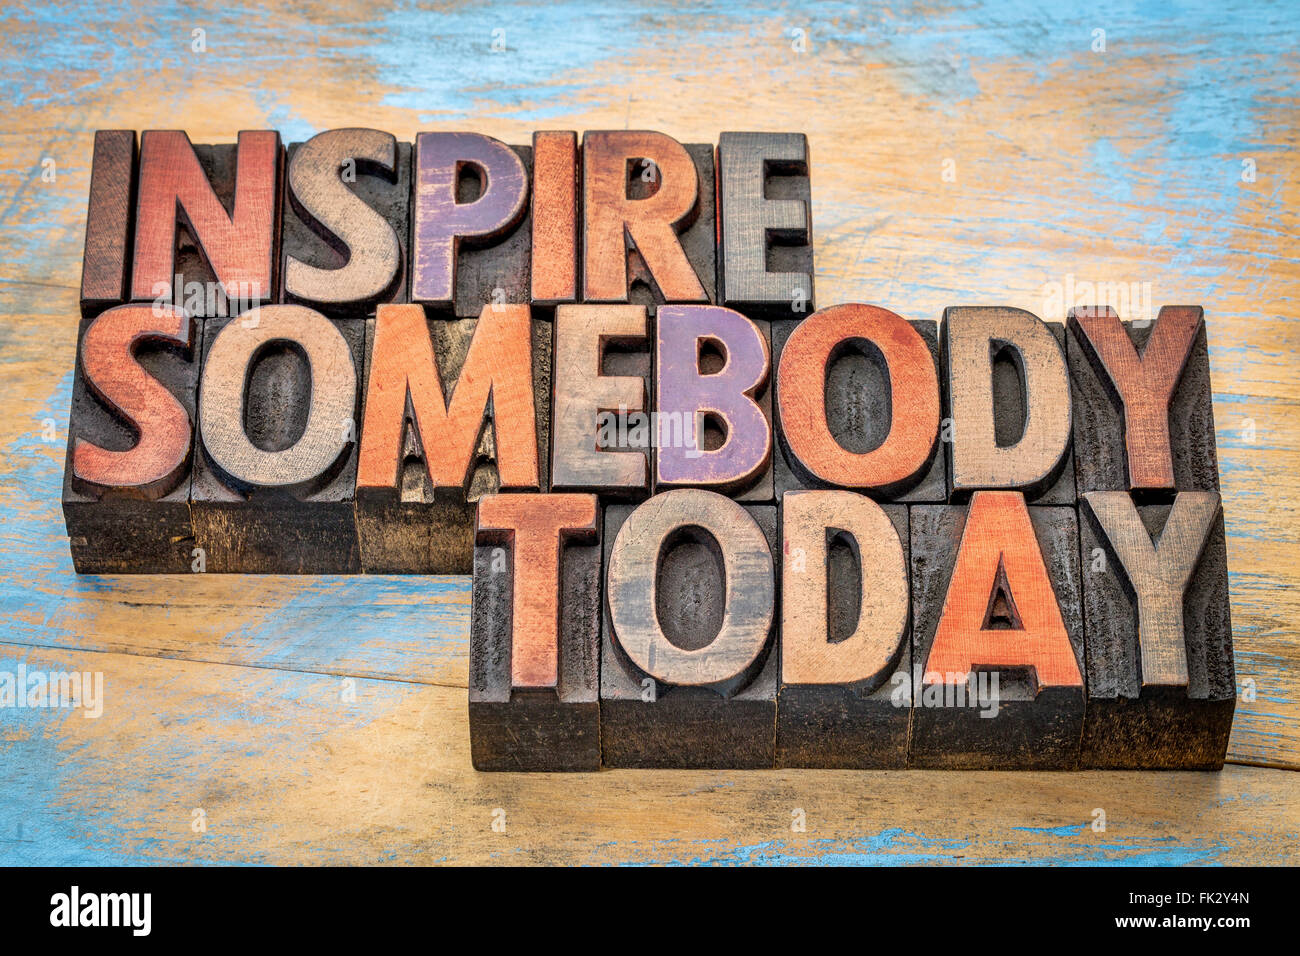 inspire somebody today - motivational text in vintage letterpress wood type Stock Photo